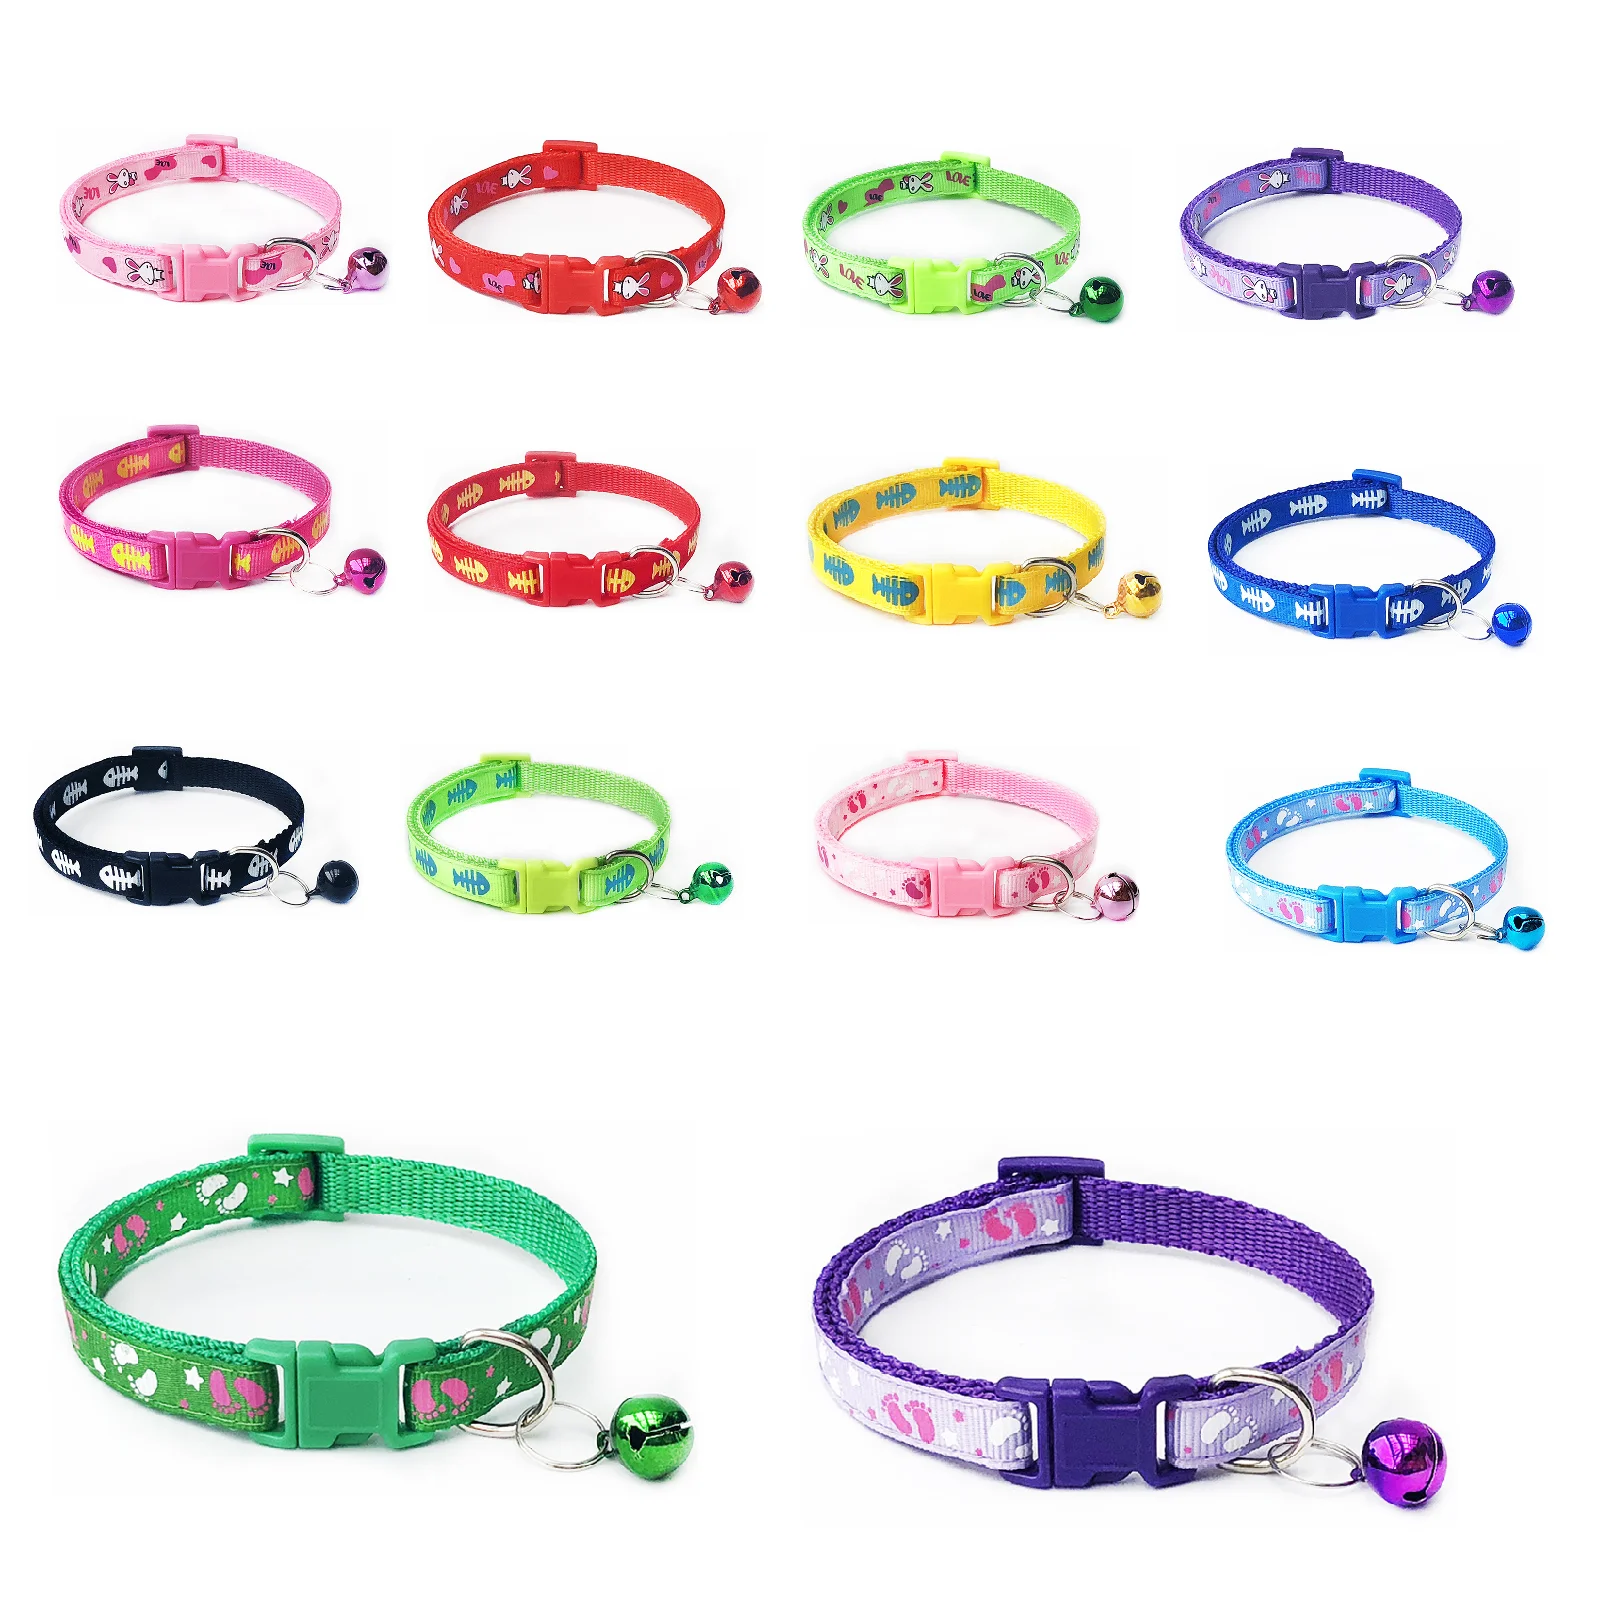 1pc Cartoon Dog Cat Collars With Bell Adjustable Polyester Buckle Collar Cat Pet Supplies Accessories Collar Small Dog Necklace pet cute cat dog safety buckle collar love pattern adjustable collars angel flower cherry necklace cat accessories pet product